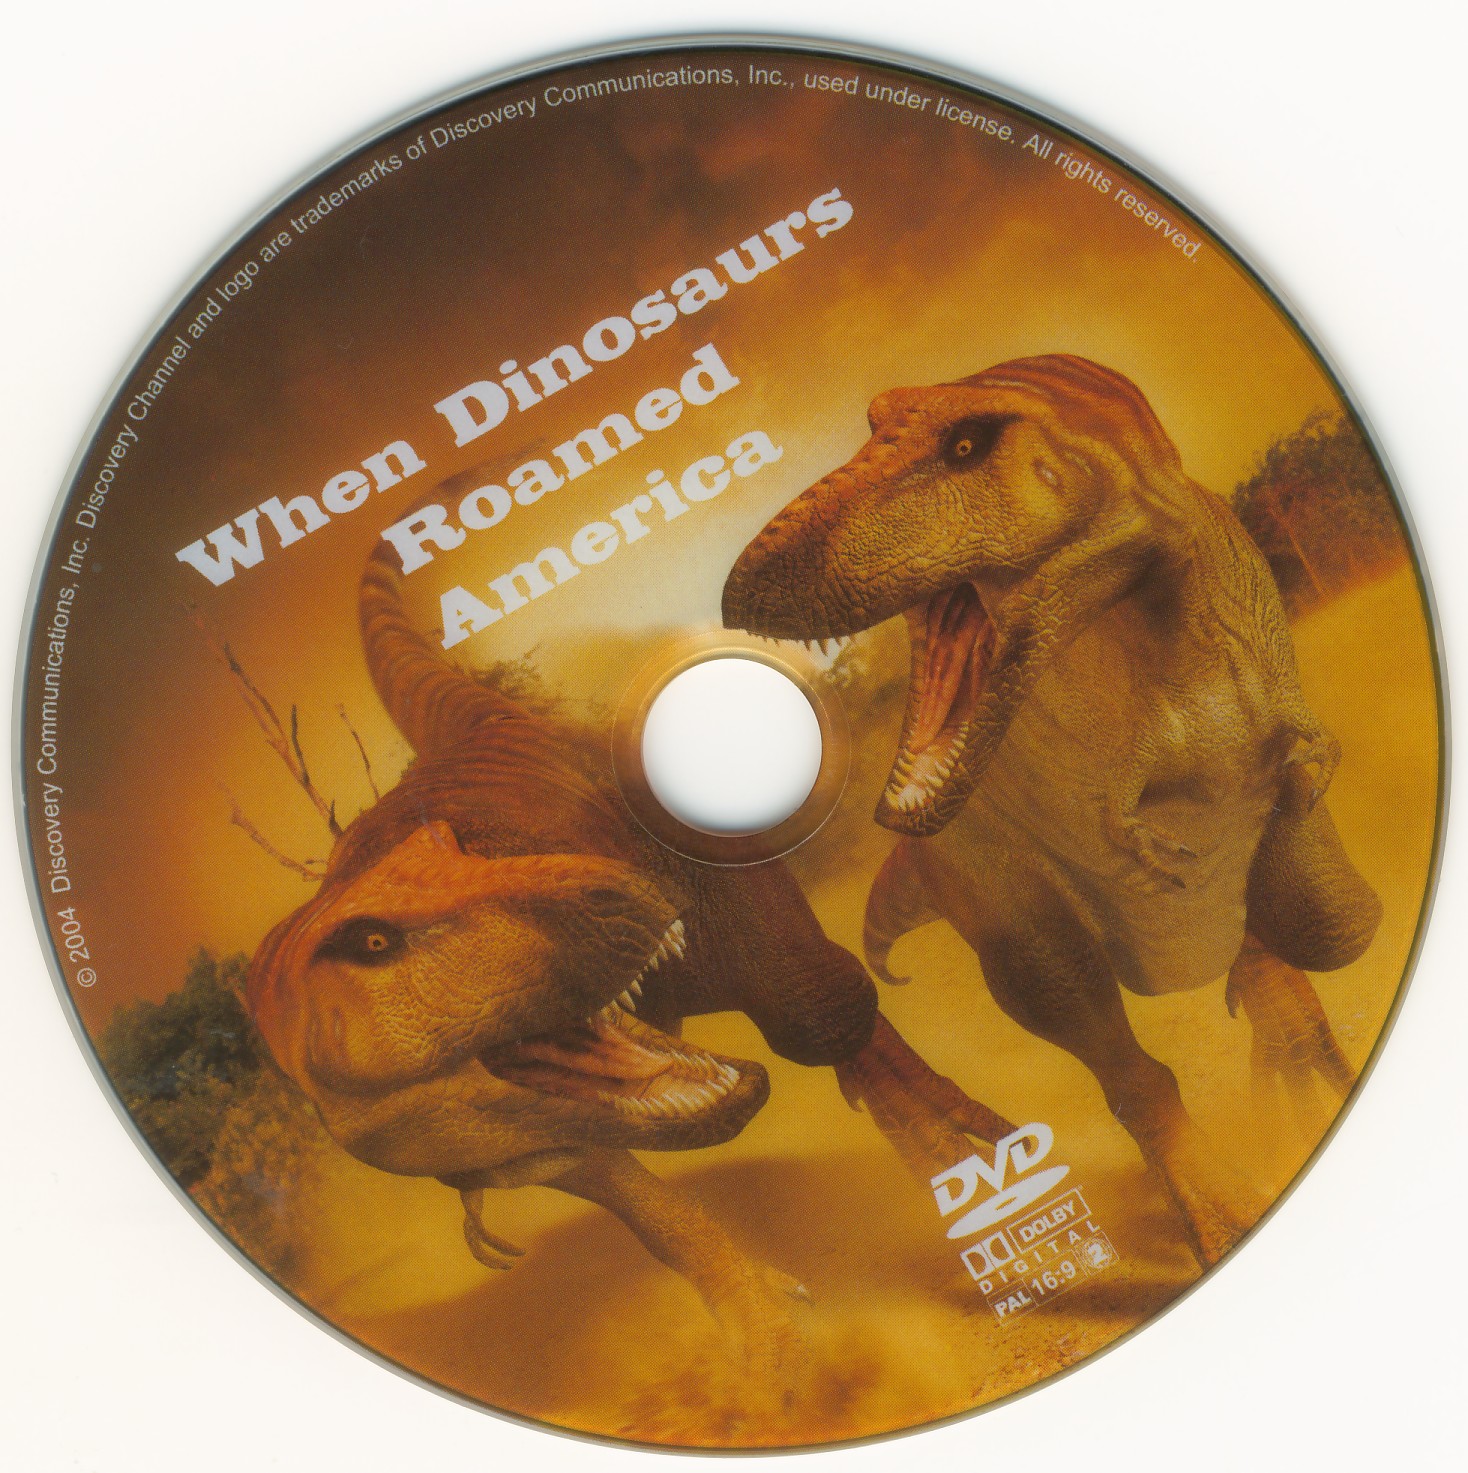 Click to view full size image -  DVD Cover - D - DVD - DOBA DINOZAURIJA - CD - DVD - DOBA DINOZAURIJA - CD.jpg